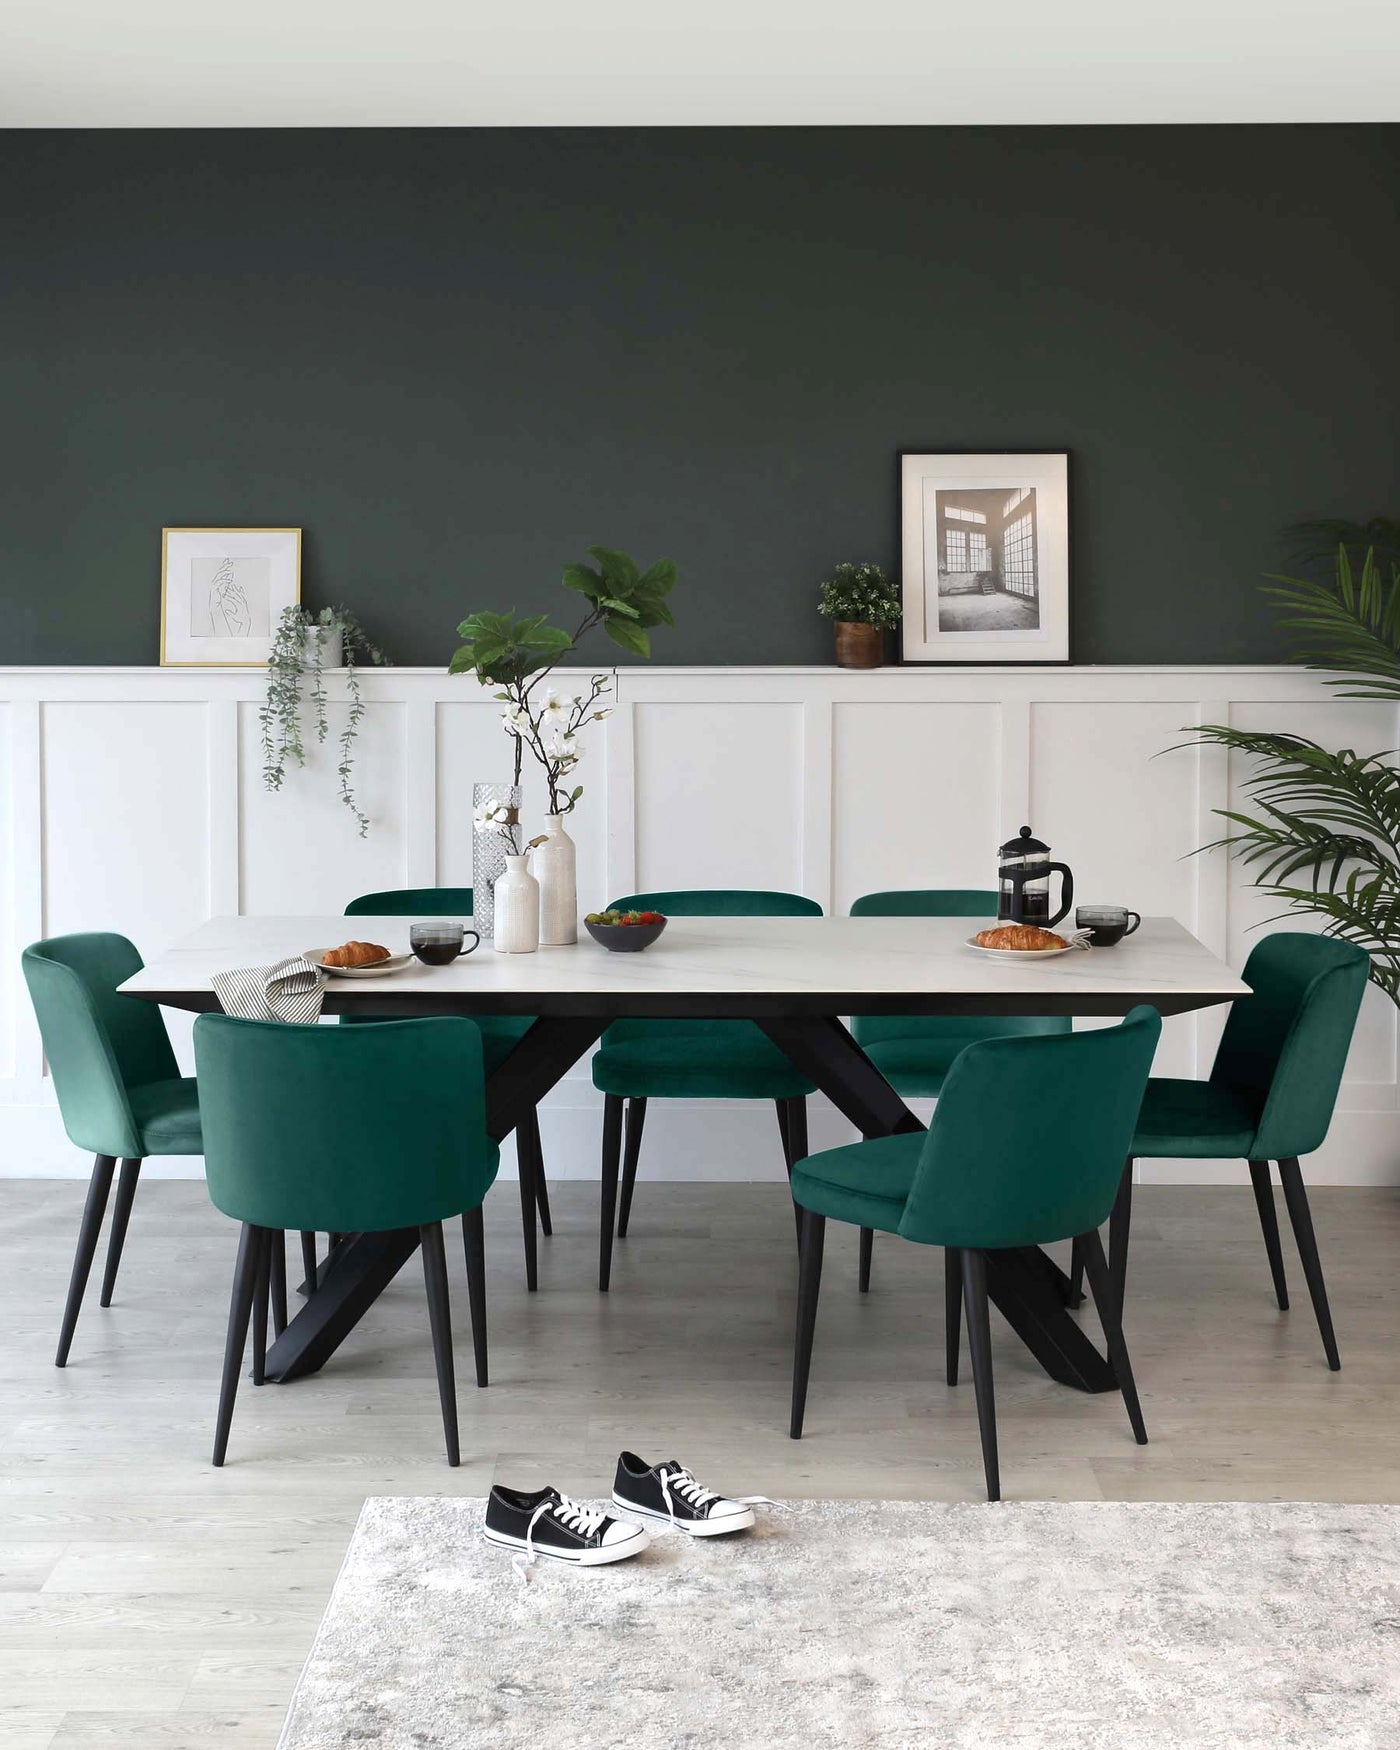 Contemporary dining room featuring a rectangular white tabletop with black legs, surrounded by six plush teal upholstered chairs with black wooden legs. A minimalistic rug with light grey tones anchors the dining set on a light wooden floor.